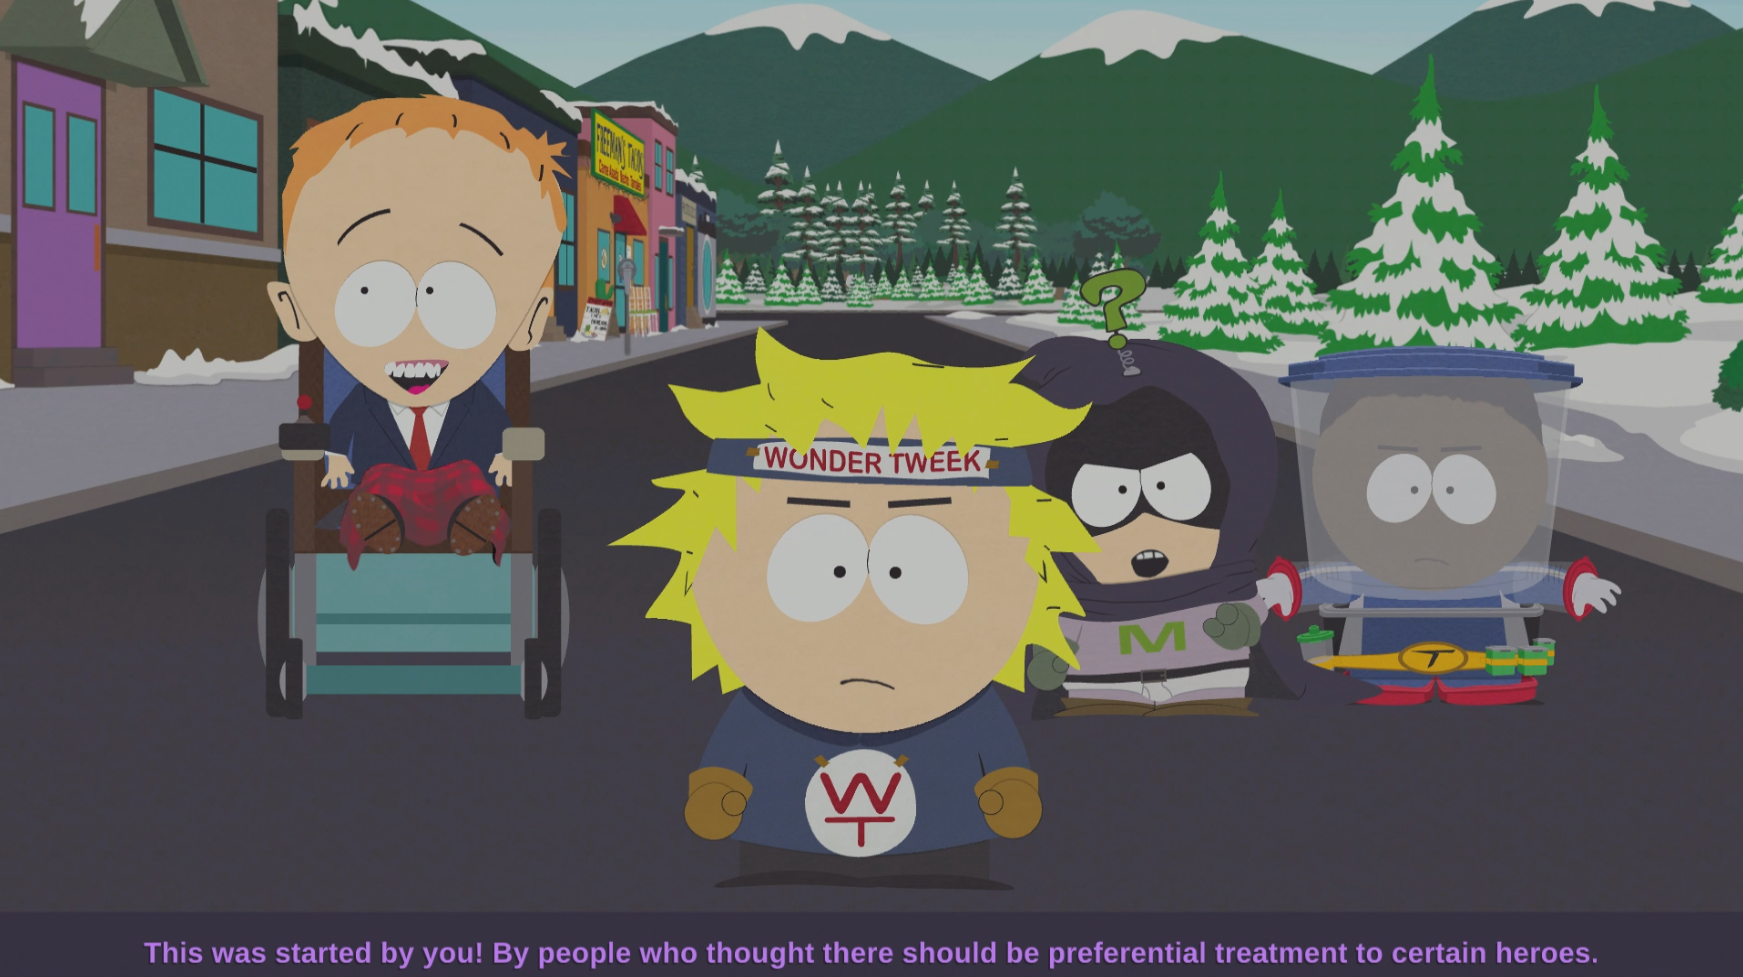 south park fractured but whole free trial